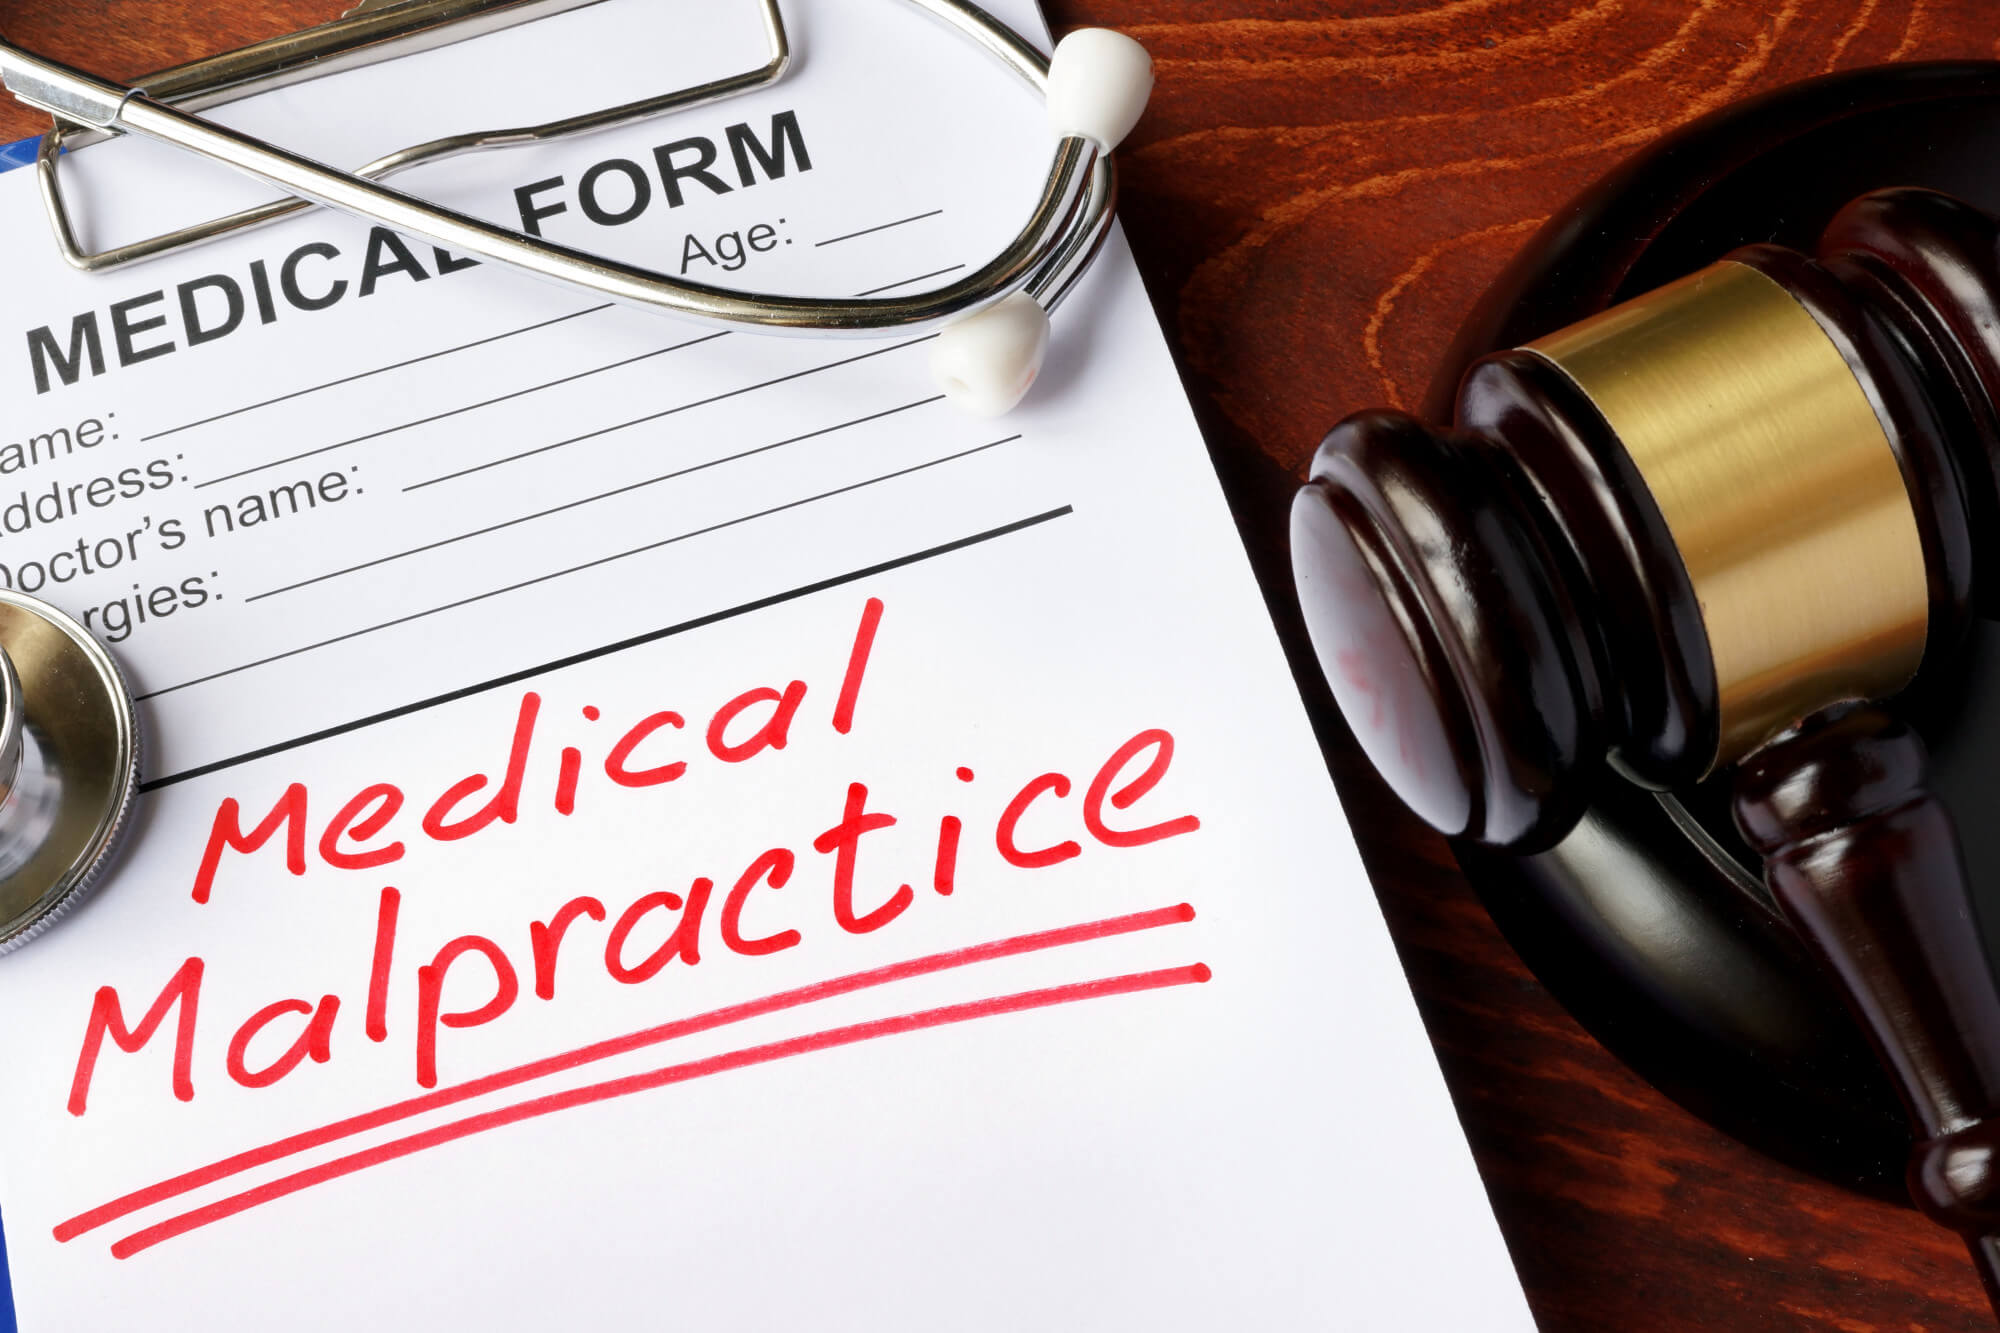 What is Medical negligence?